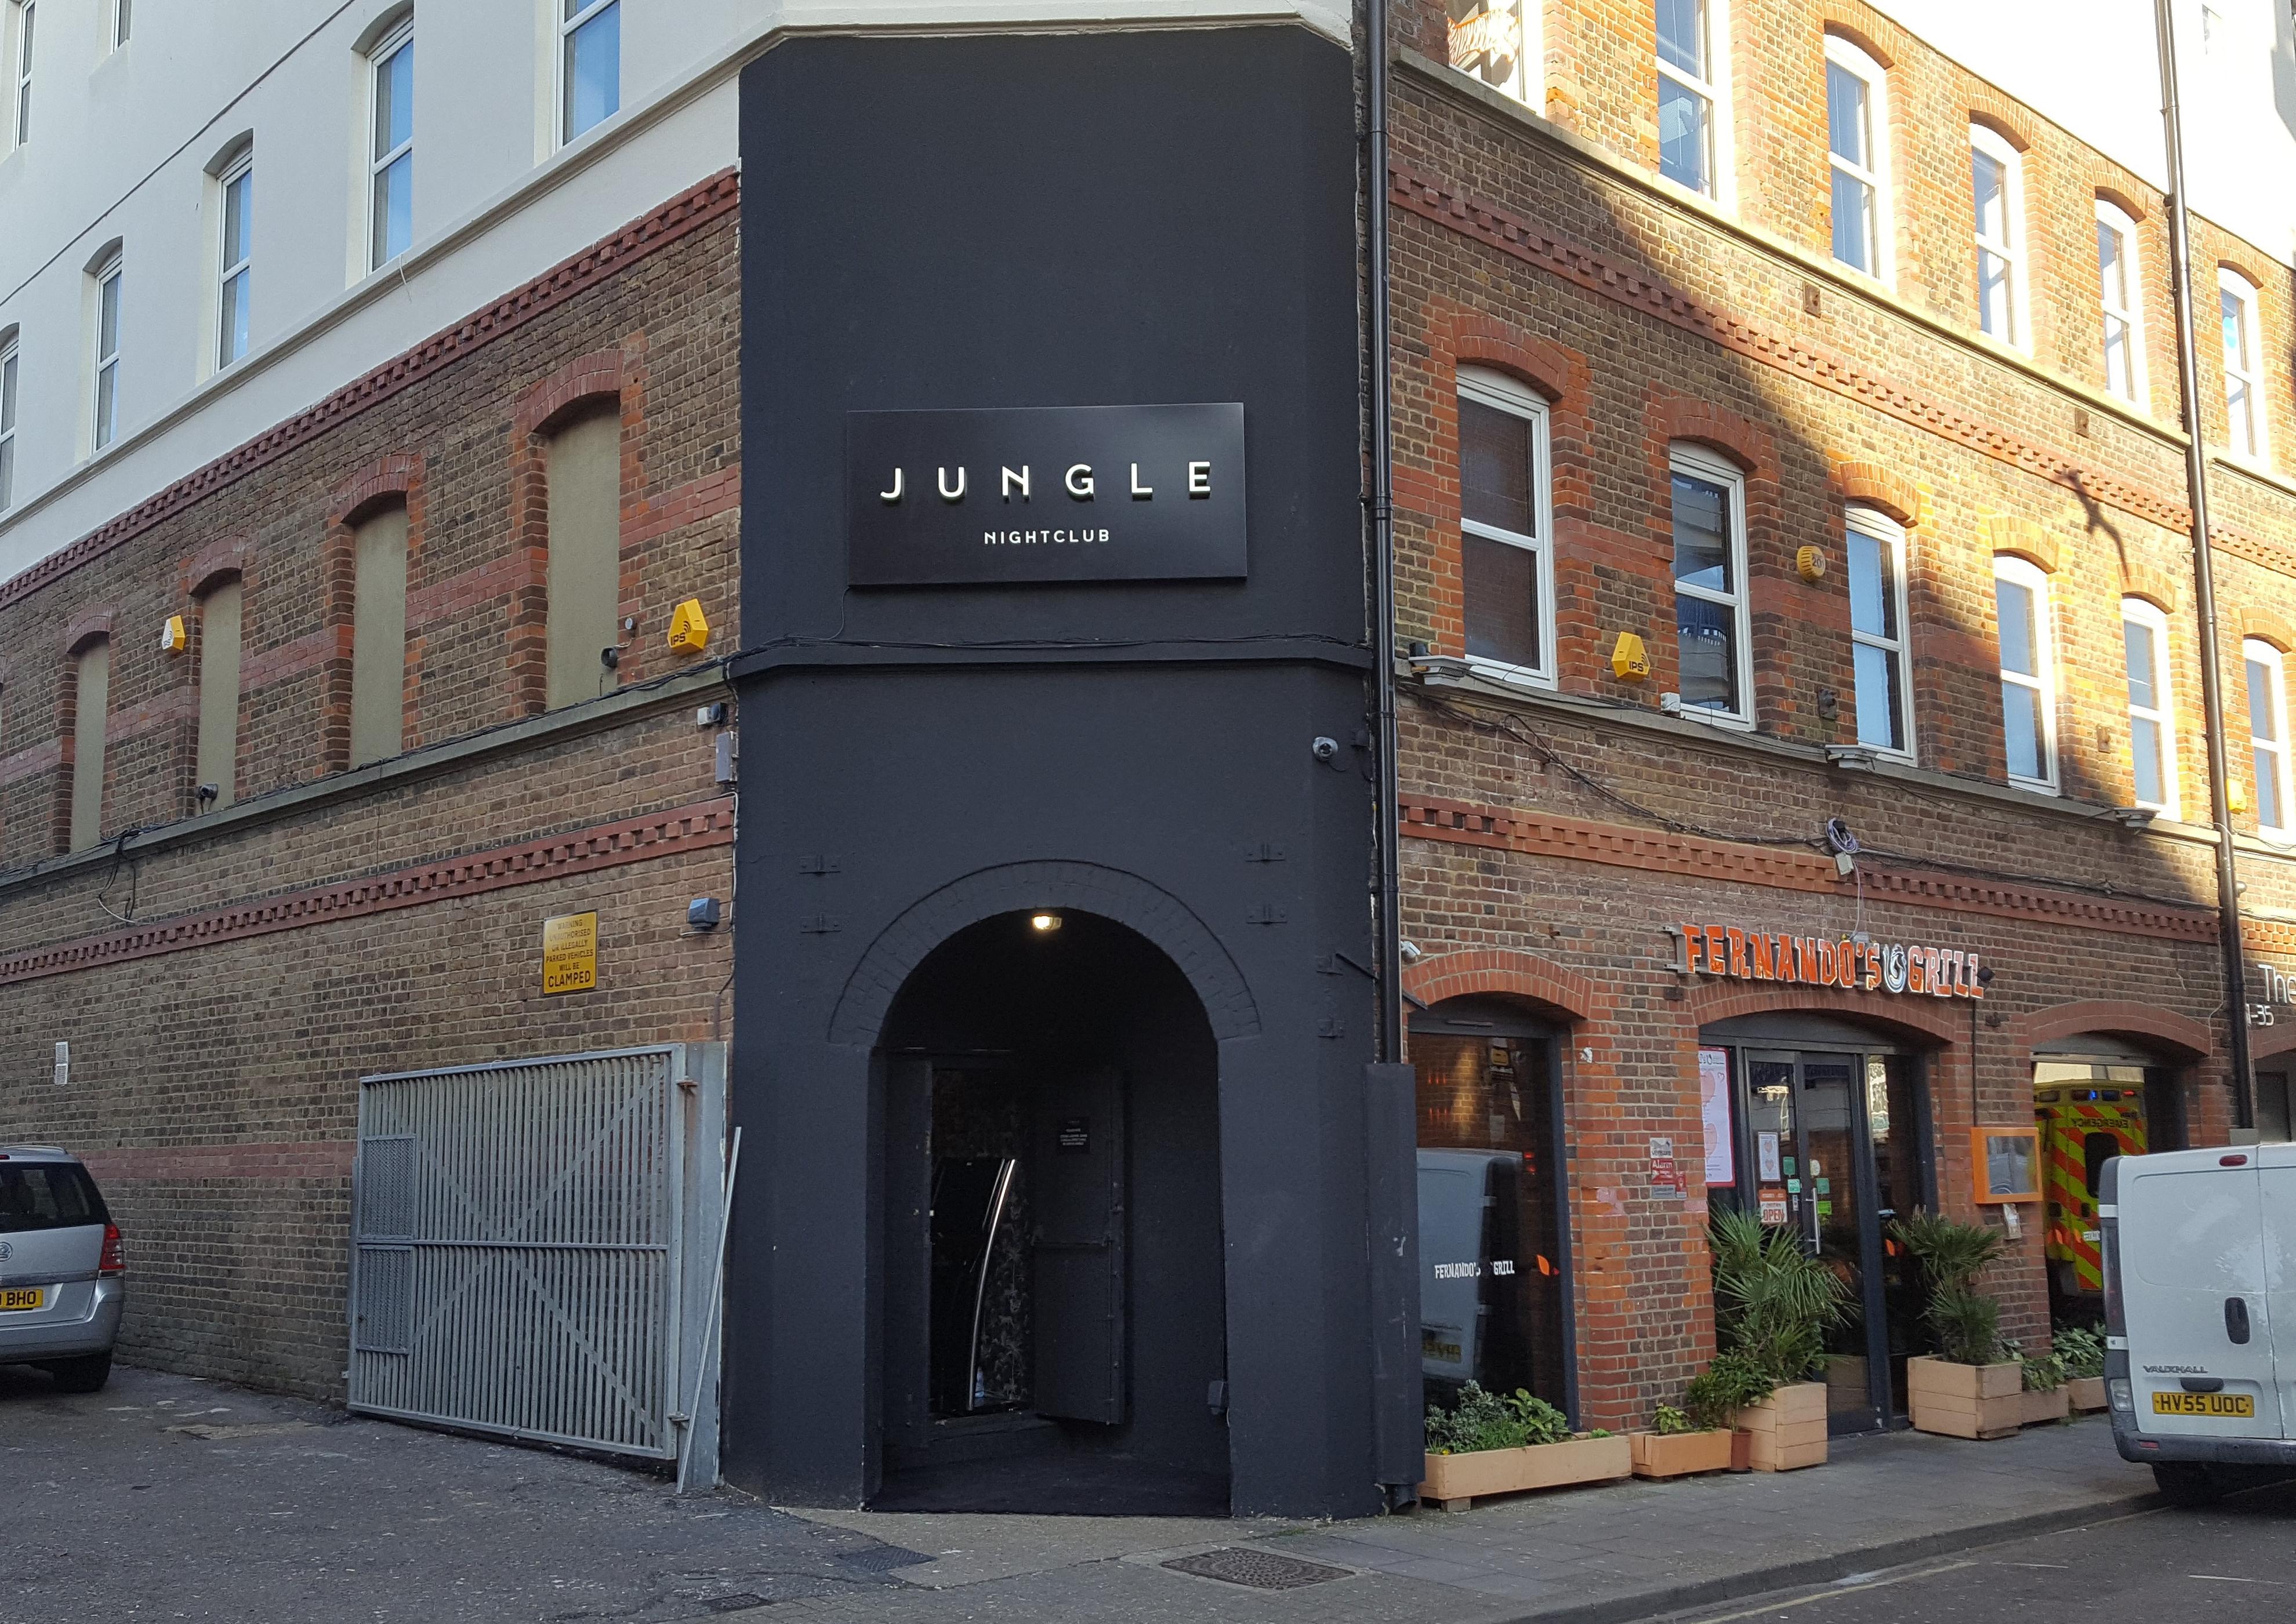 After an extensive renovation, Jungle nightclub opened in the former Liquid building in January 2020